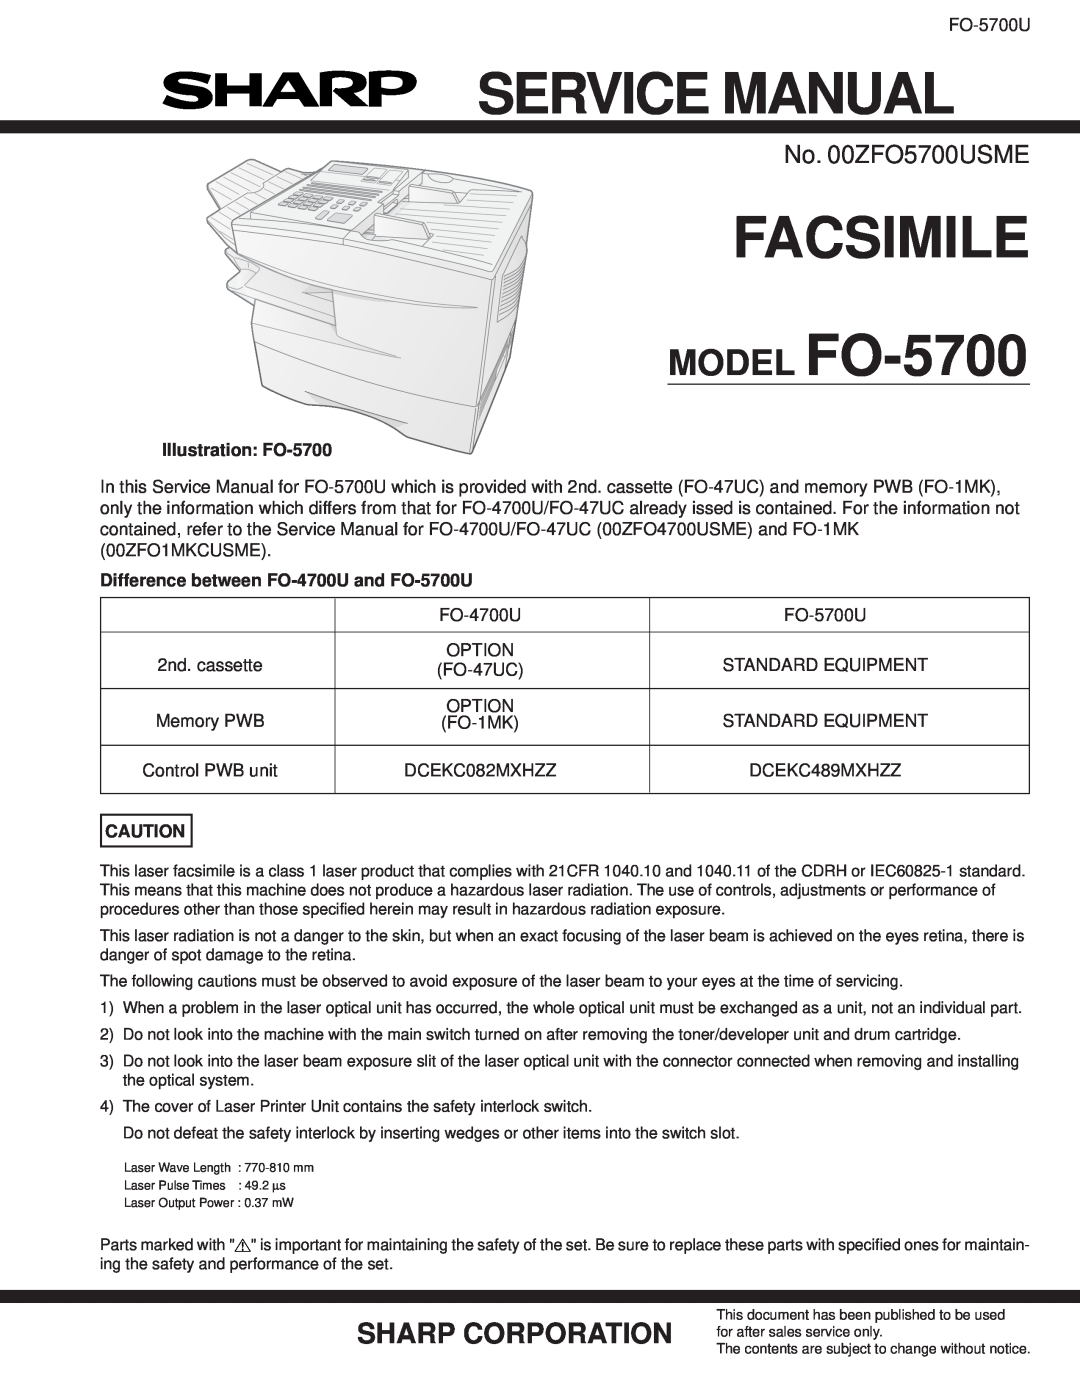 Sharp service manual Illustration FO-5700, Difference between FO-4700U and FO-5700U, Service Manual, No. 00ZFO5700USME 